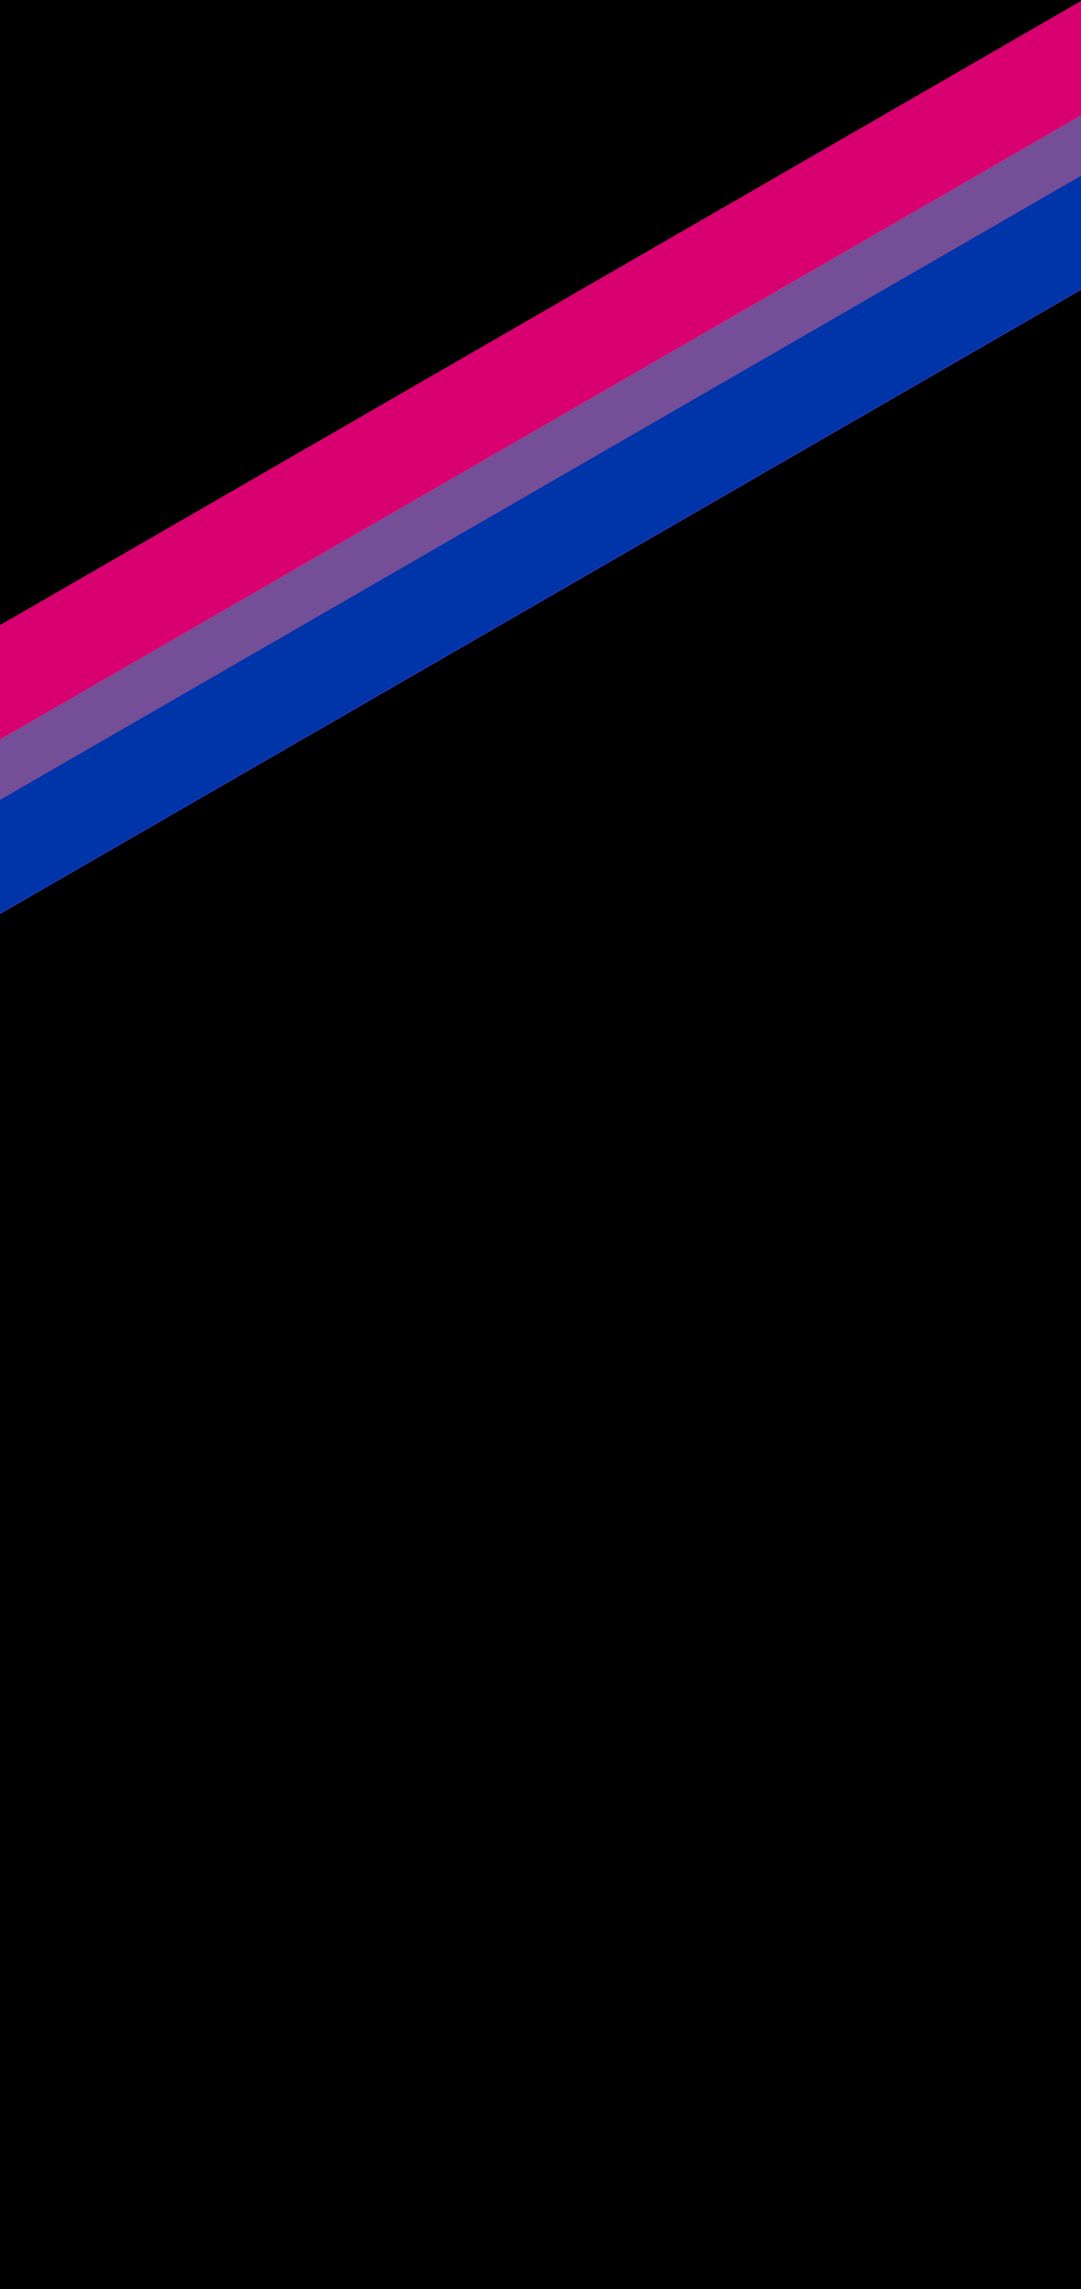 Bi pride wallpaper [1080x1920] (links in the comments)